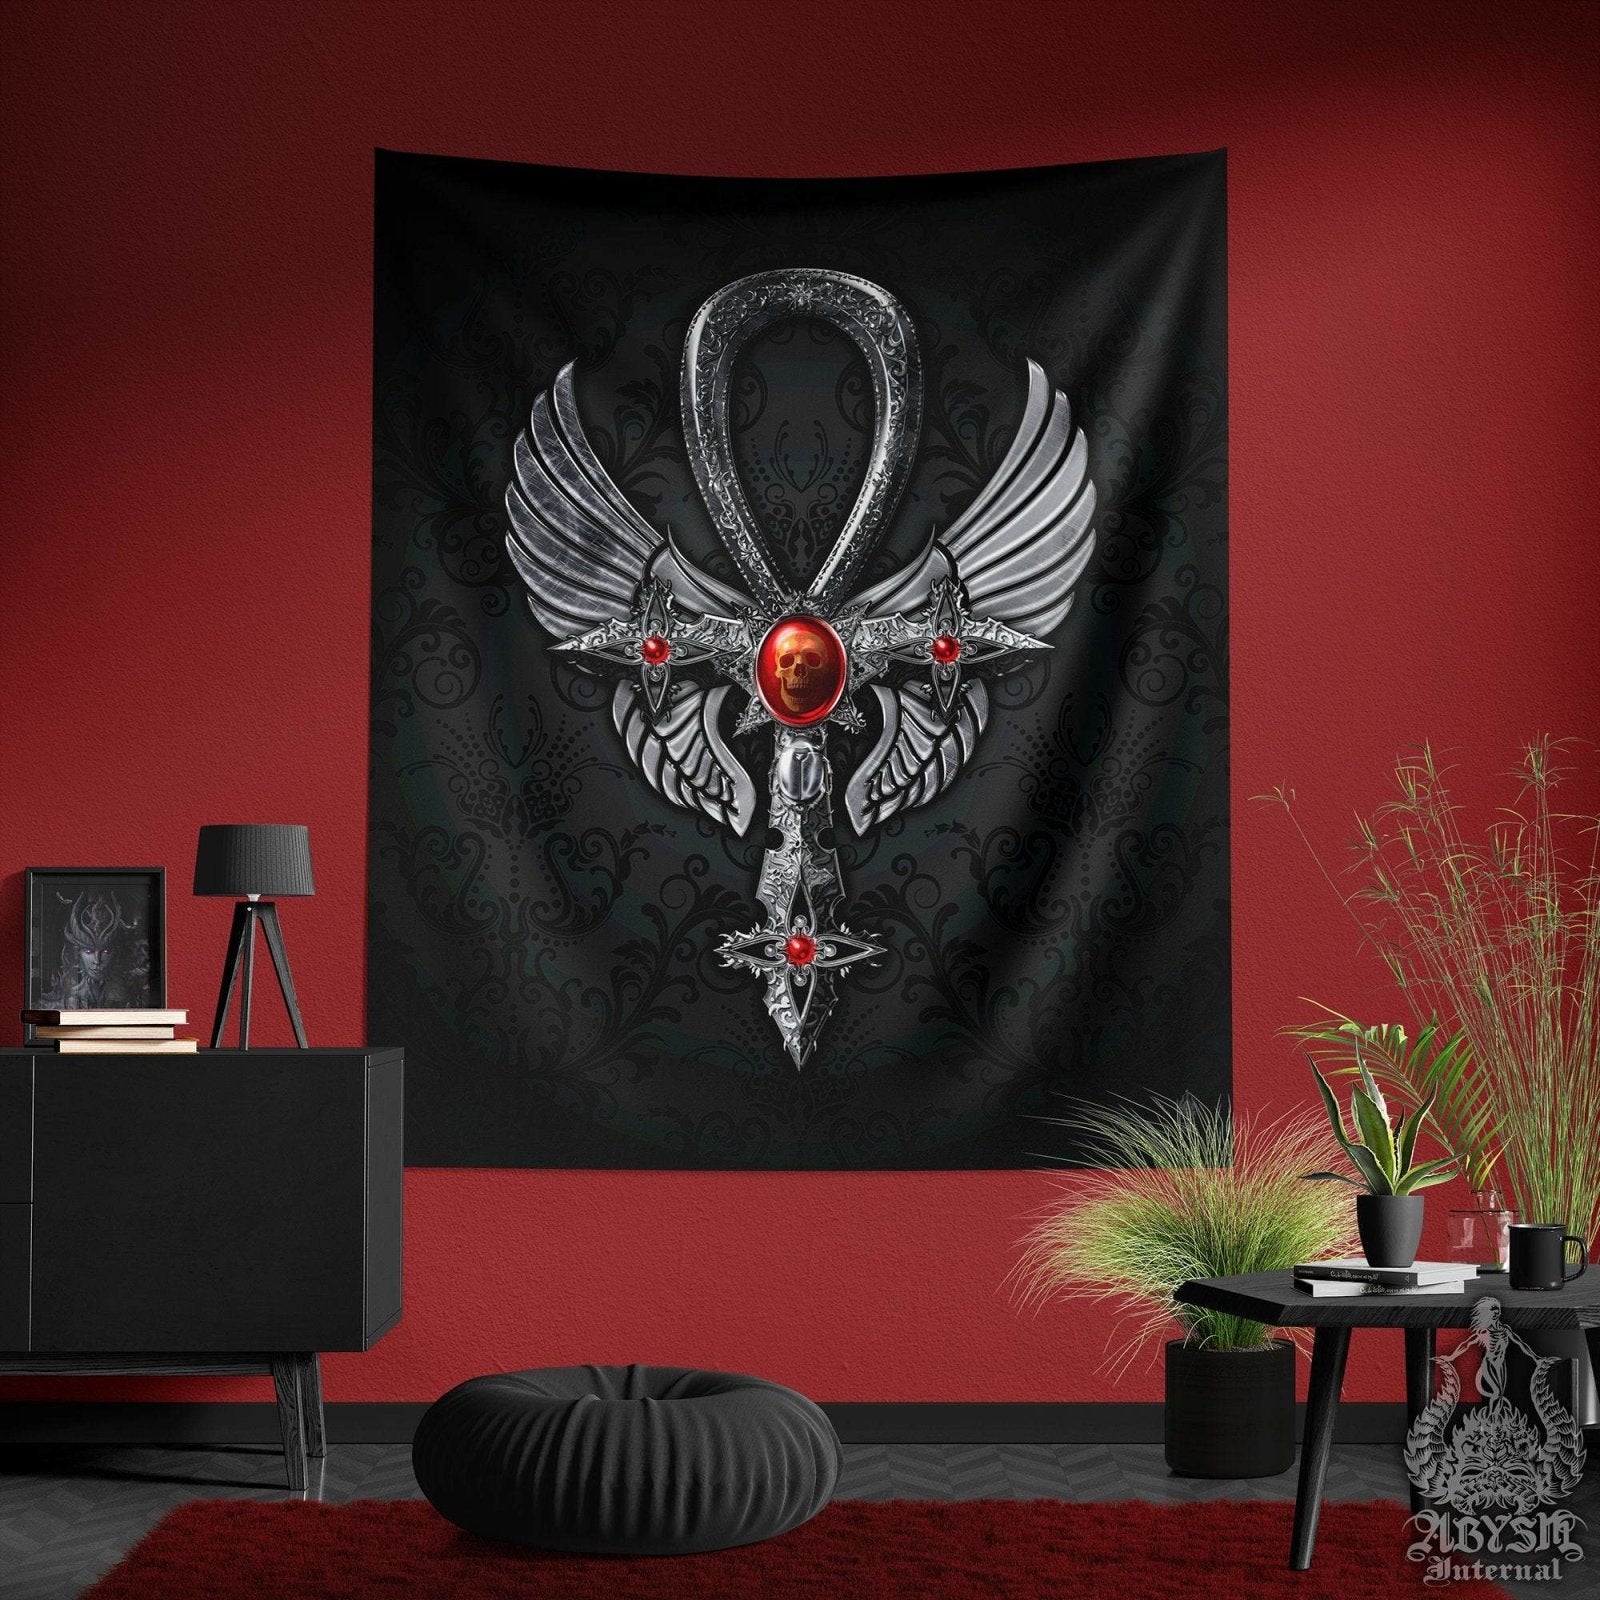 Gothic Tapestry, Ankh Wall Hanging, Occult Home Decor, Art Print - Nu Goth Cross - Abysm Internal